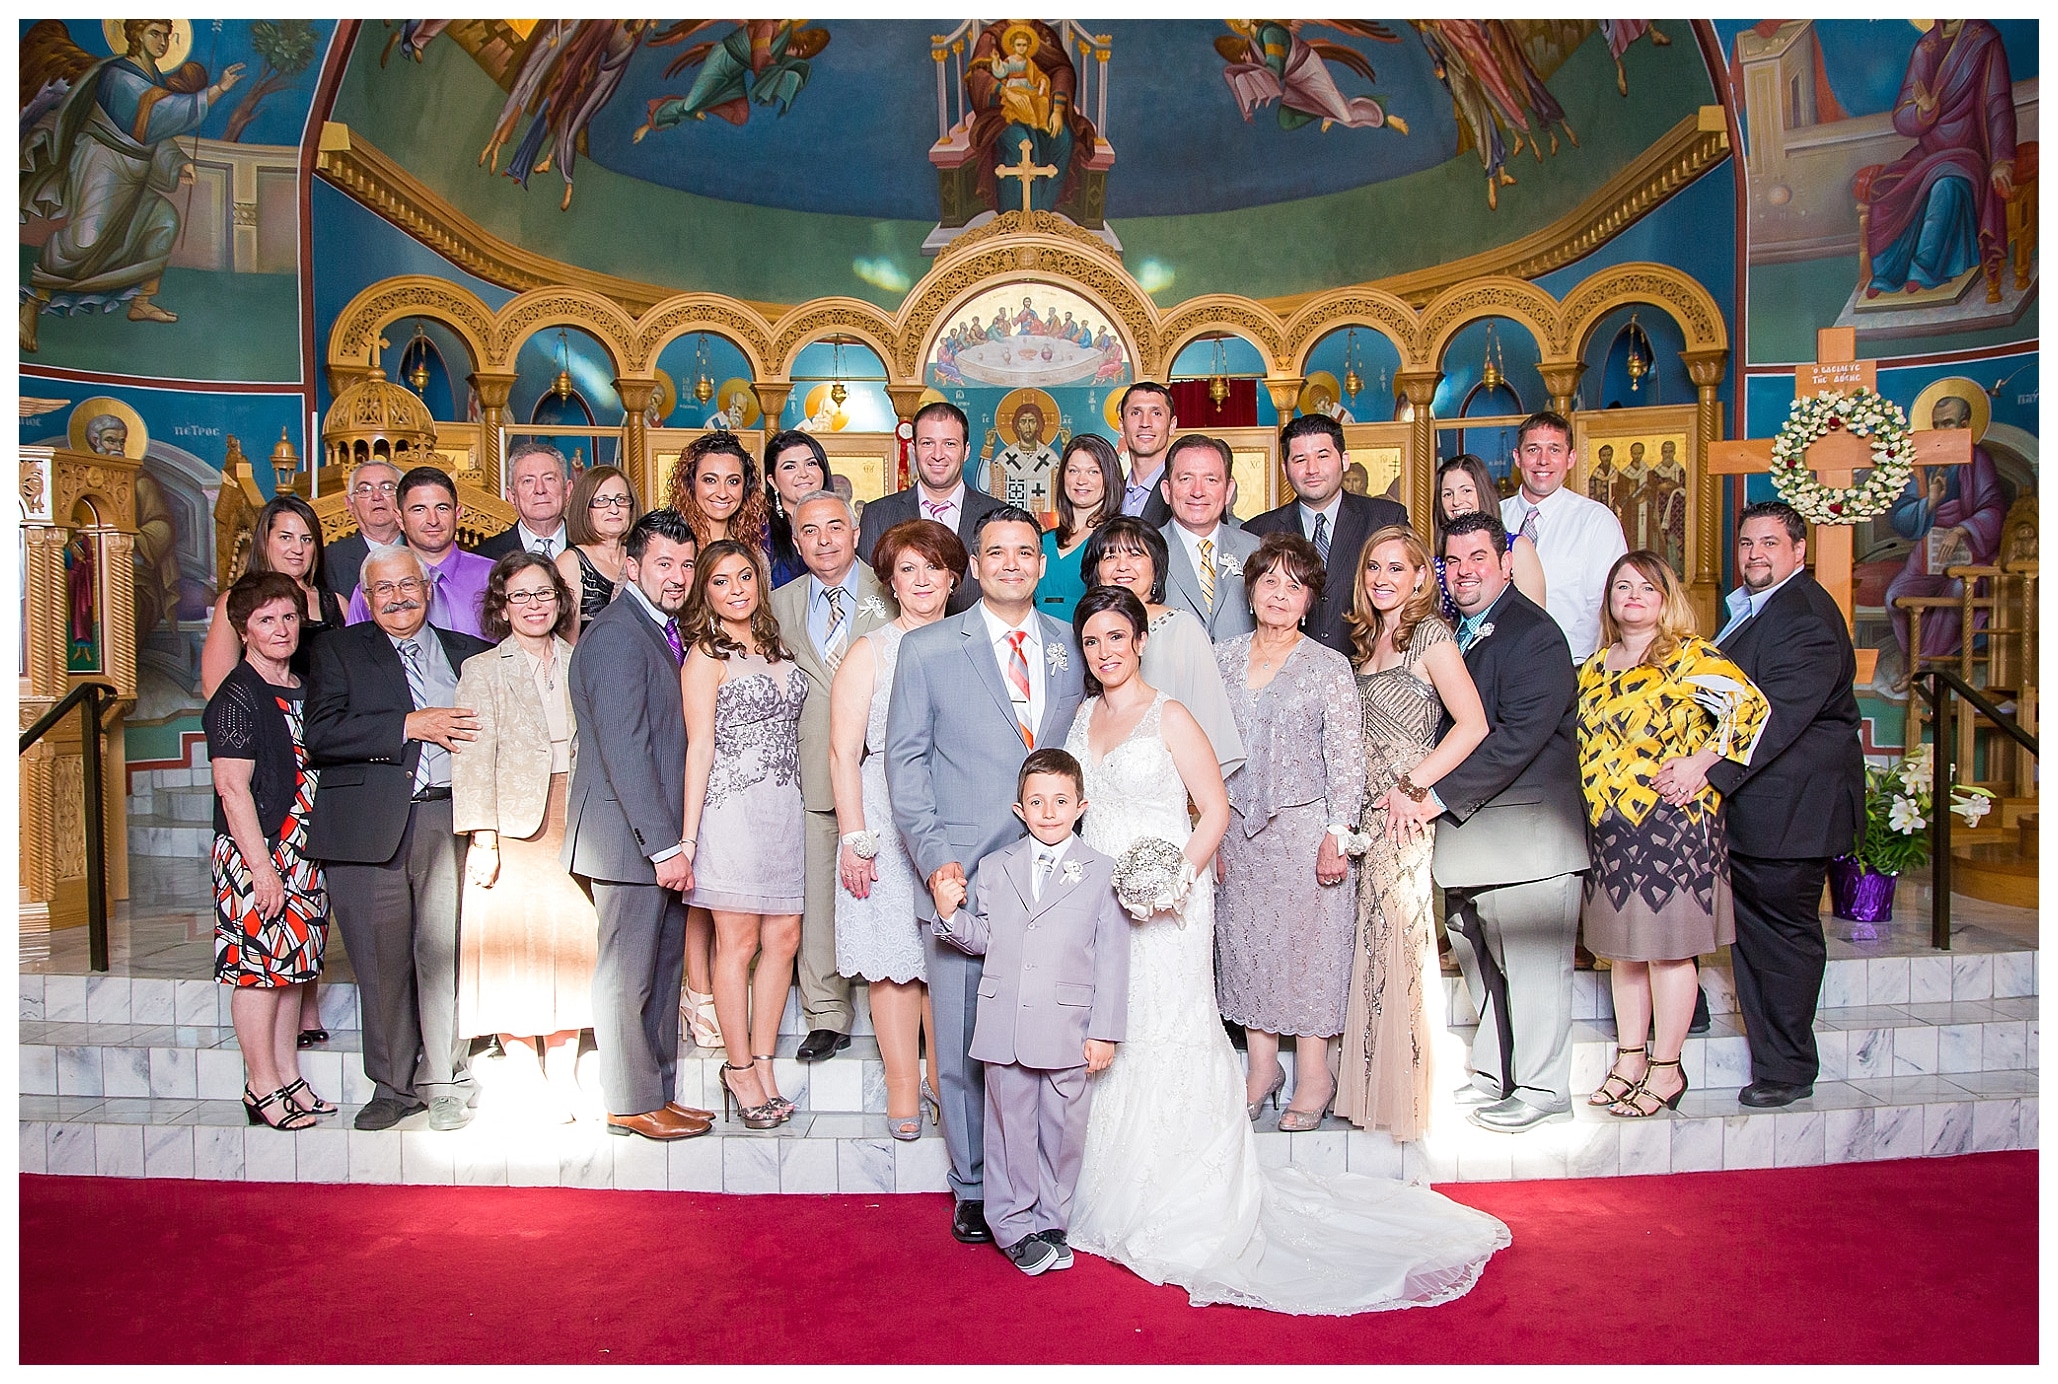 Big Family portrait in the Church right after the ceremony 